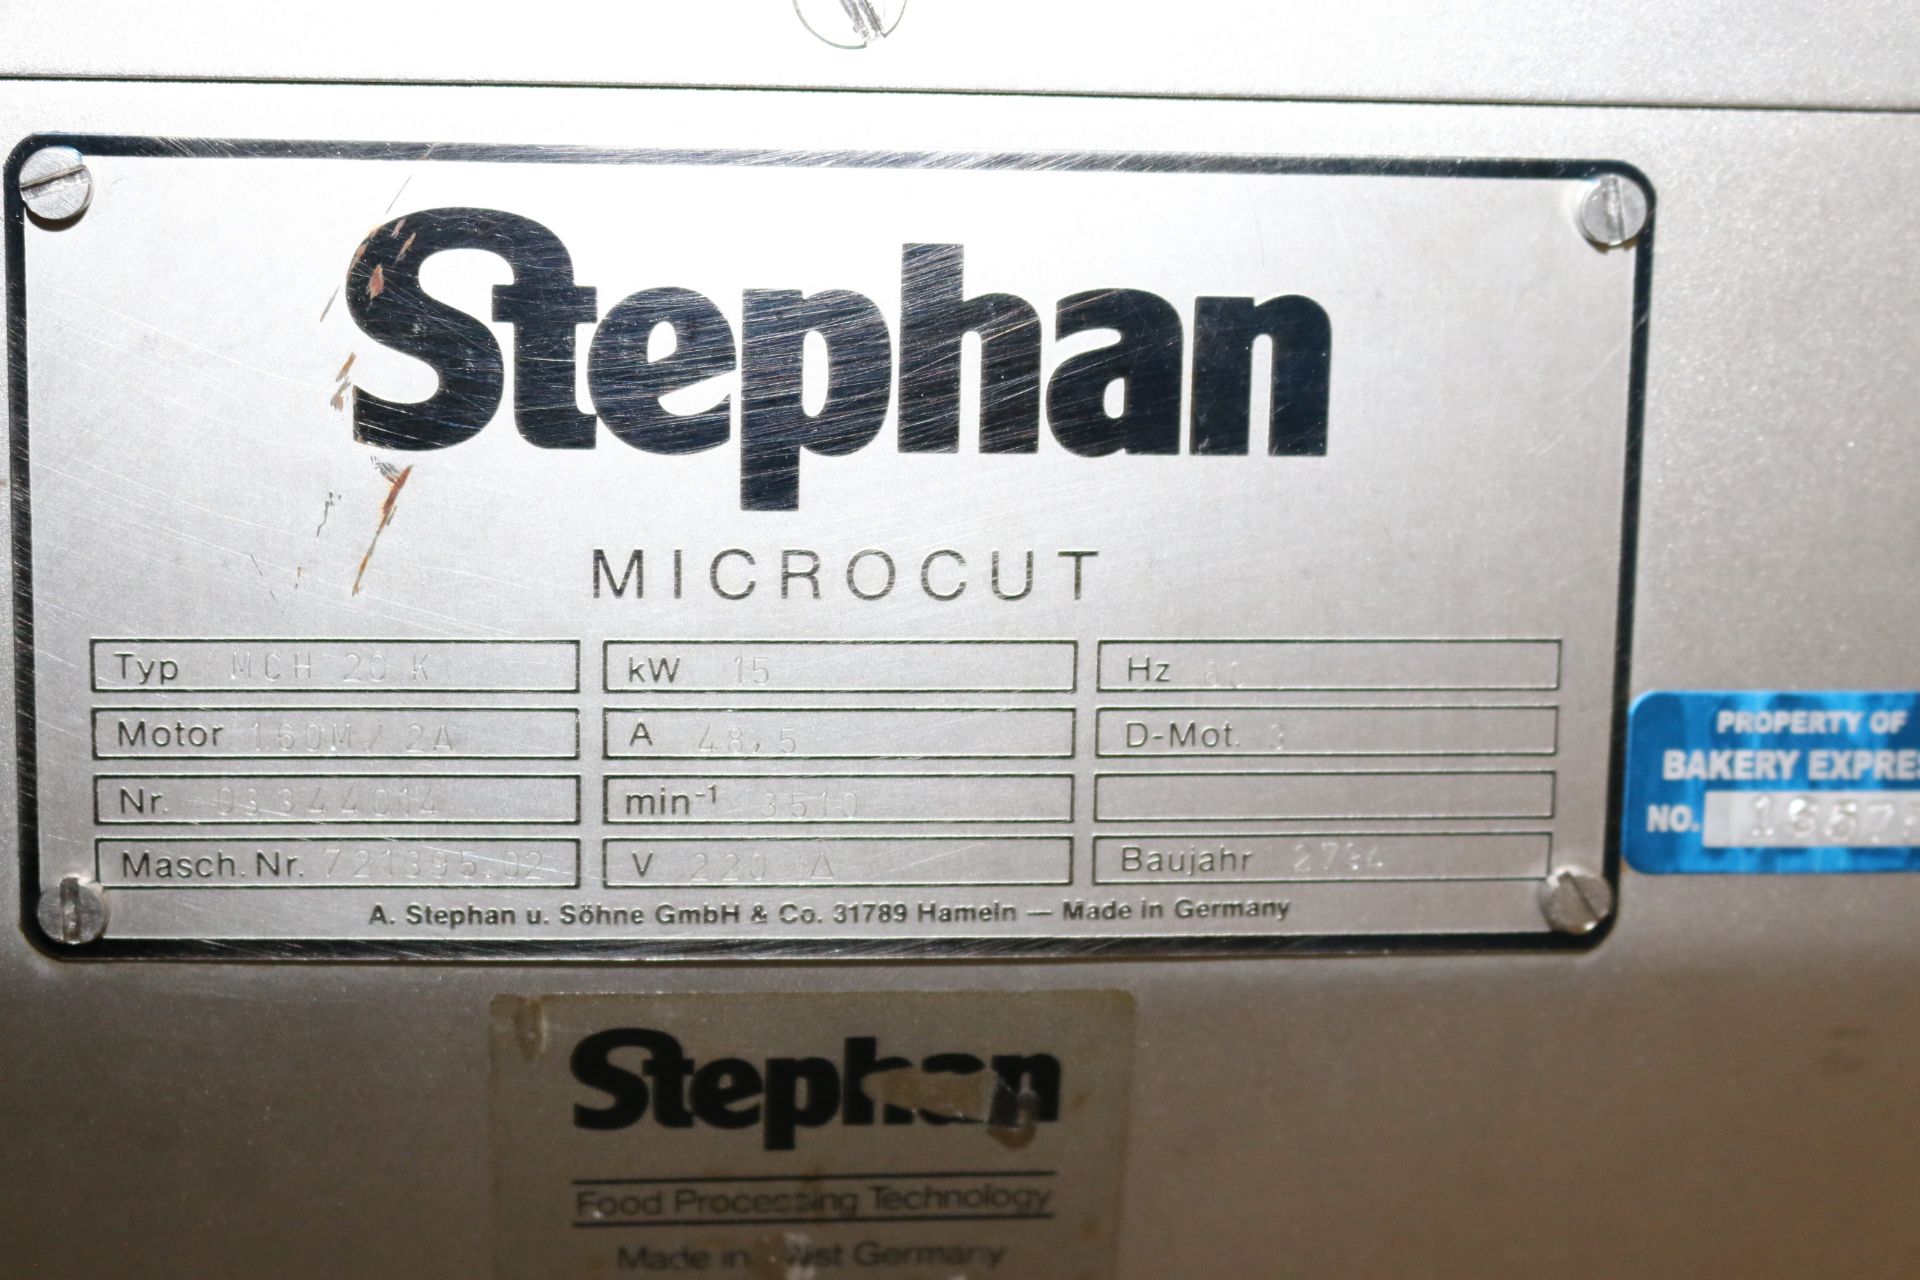 Stephan S/S Microcut, Type MCH 20K, Nr.: 03344014, Mach. Nr.: 721395.02, Motor 160M/2A, 220 Volts, - Image 6 of 15